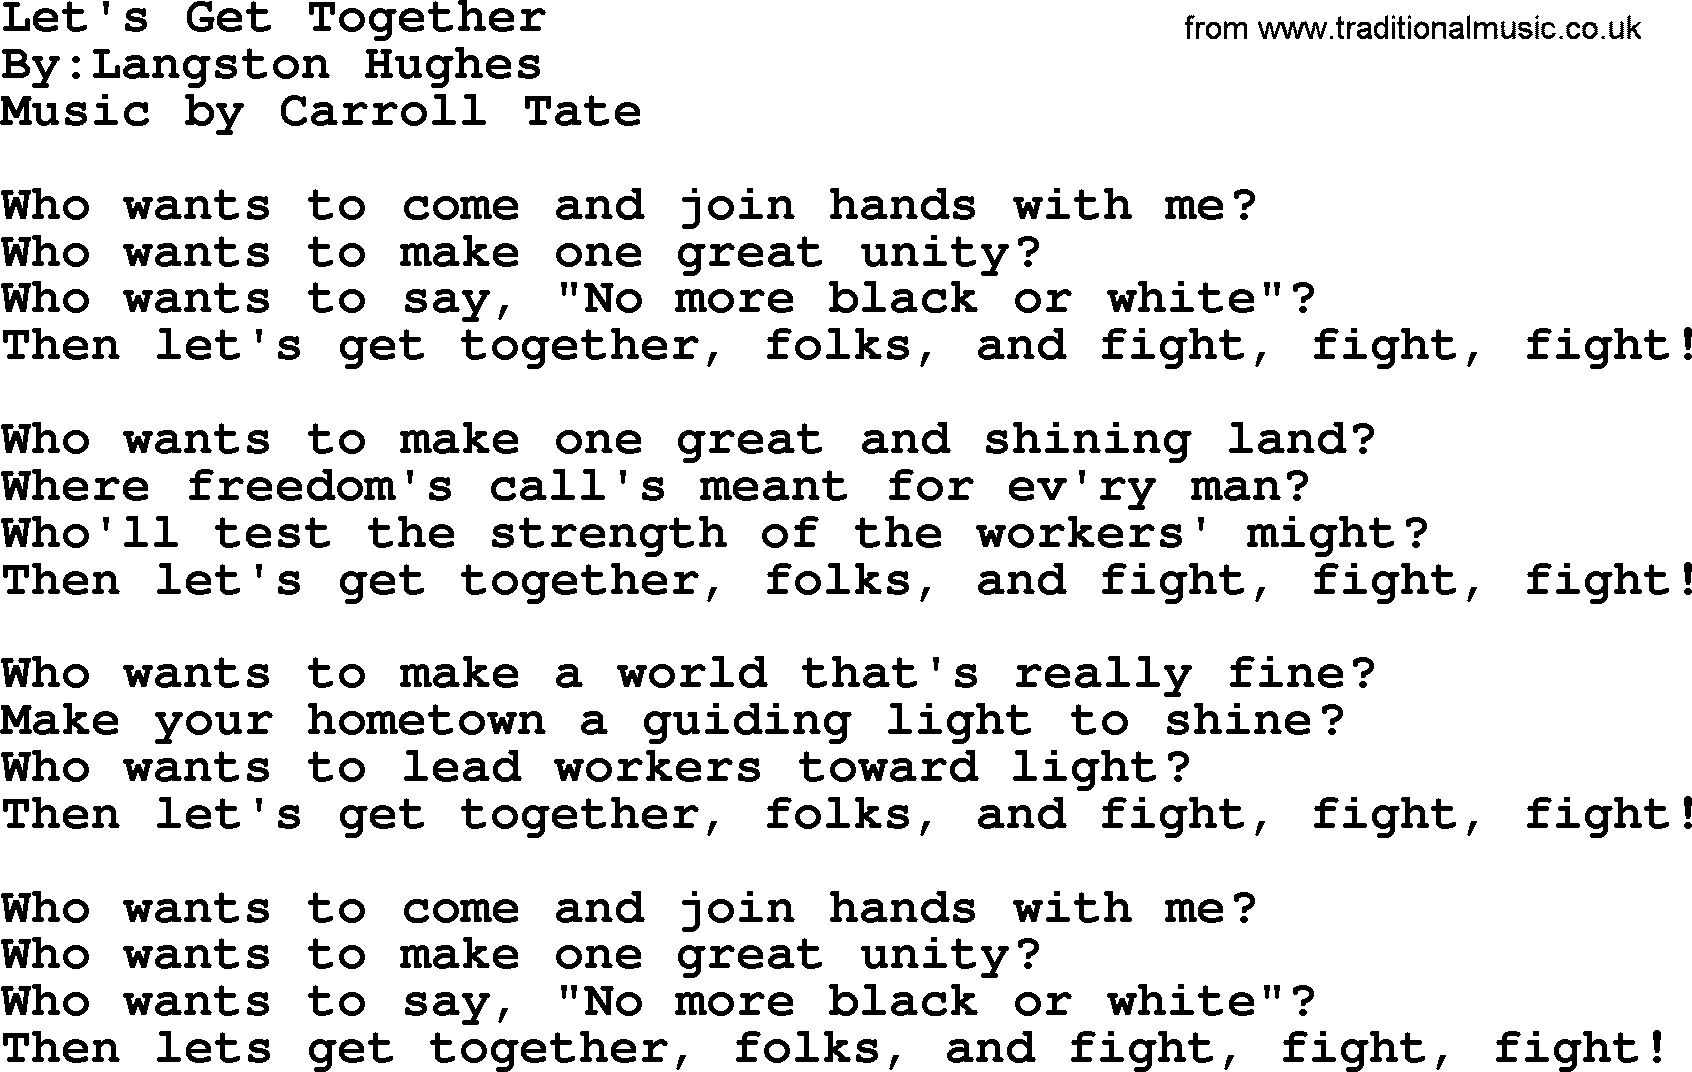 Political, Solidarity, Workers or Union song: Lets Get Together, lyrics